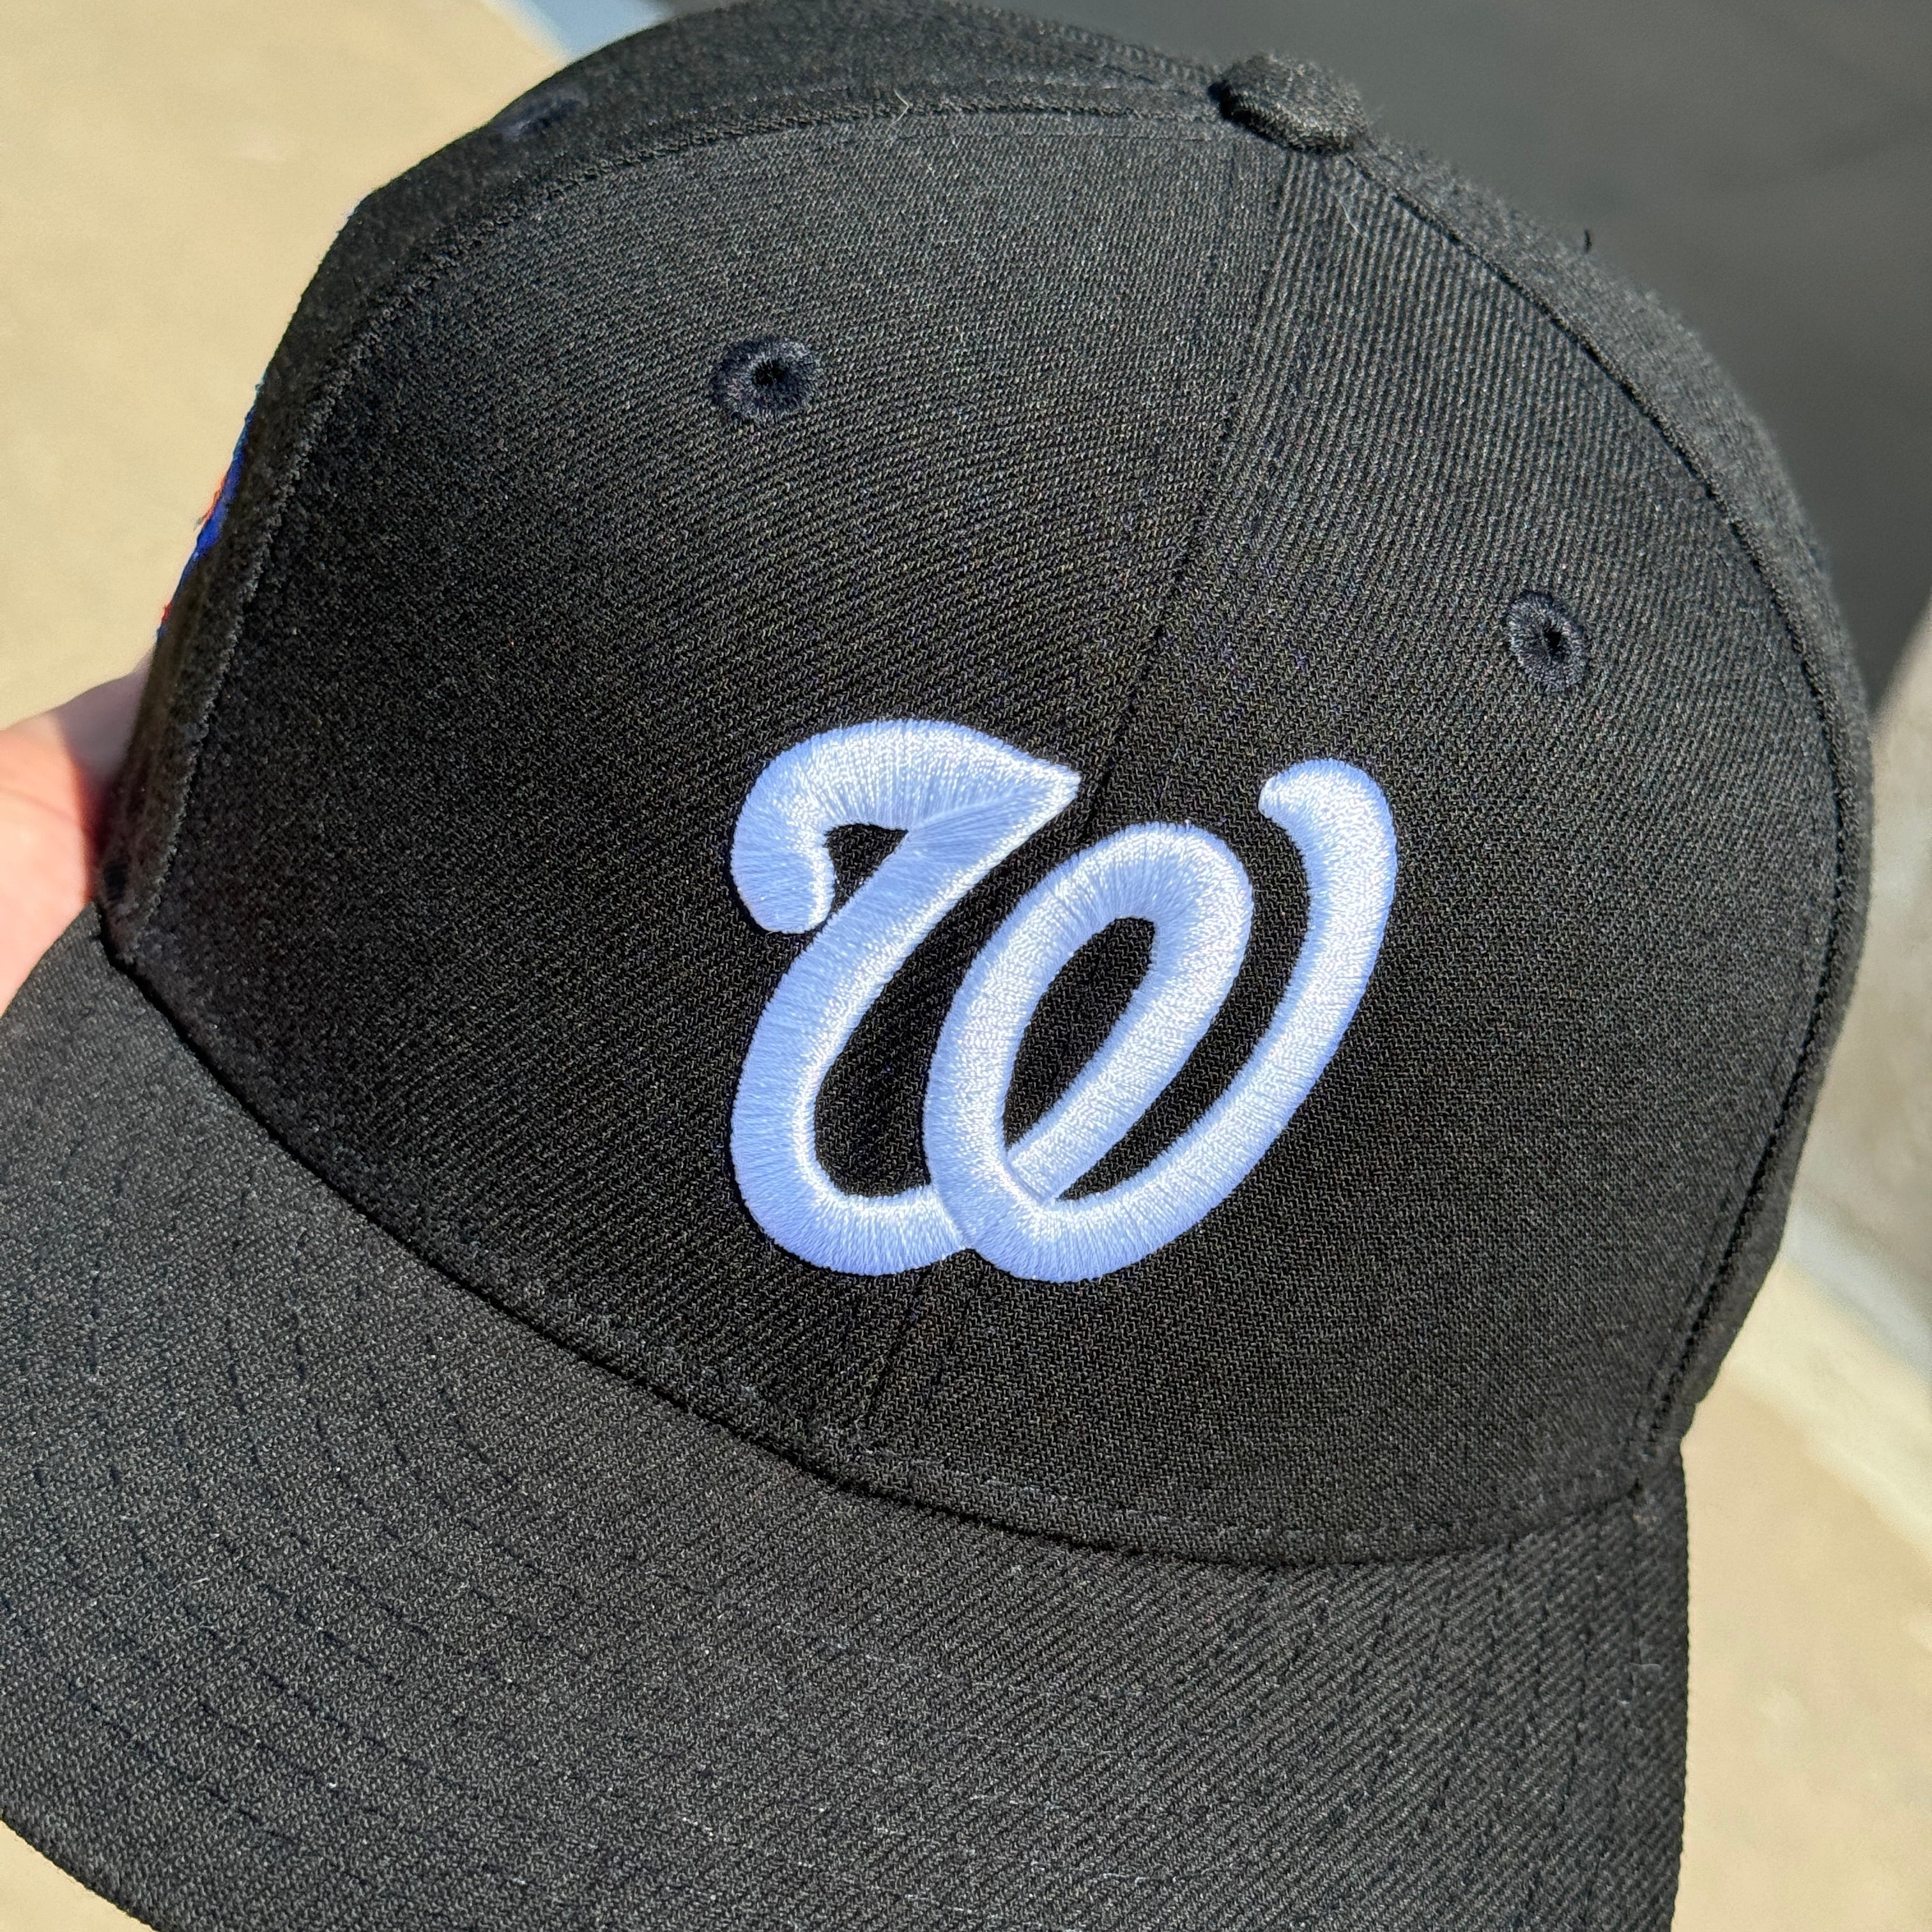 USED 1/8 Black Washington Nationals 2019 World Series 59fifty New Era Fitted Hat Cap